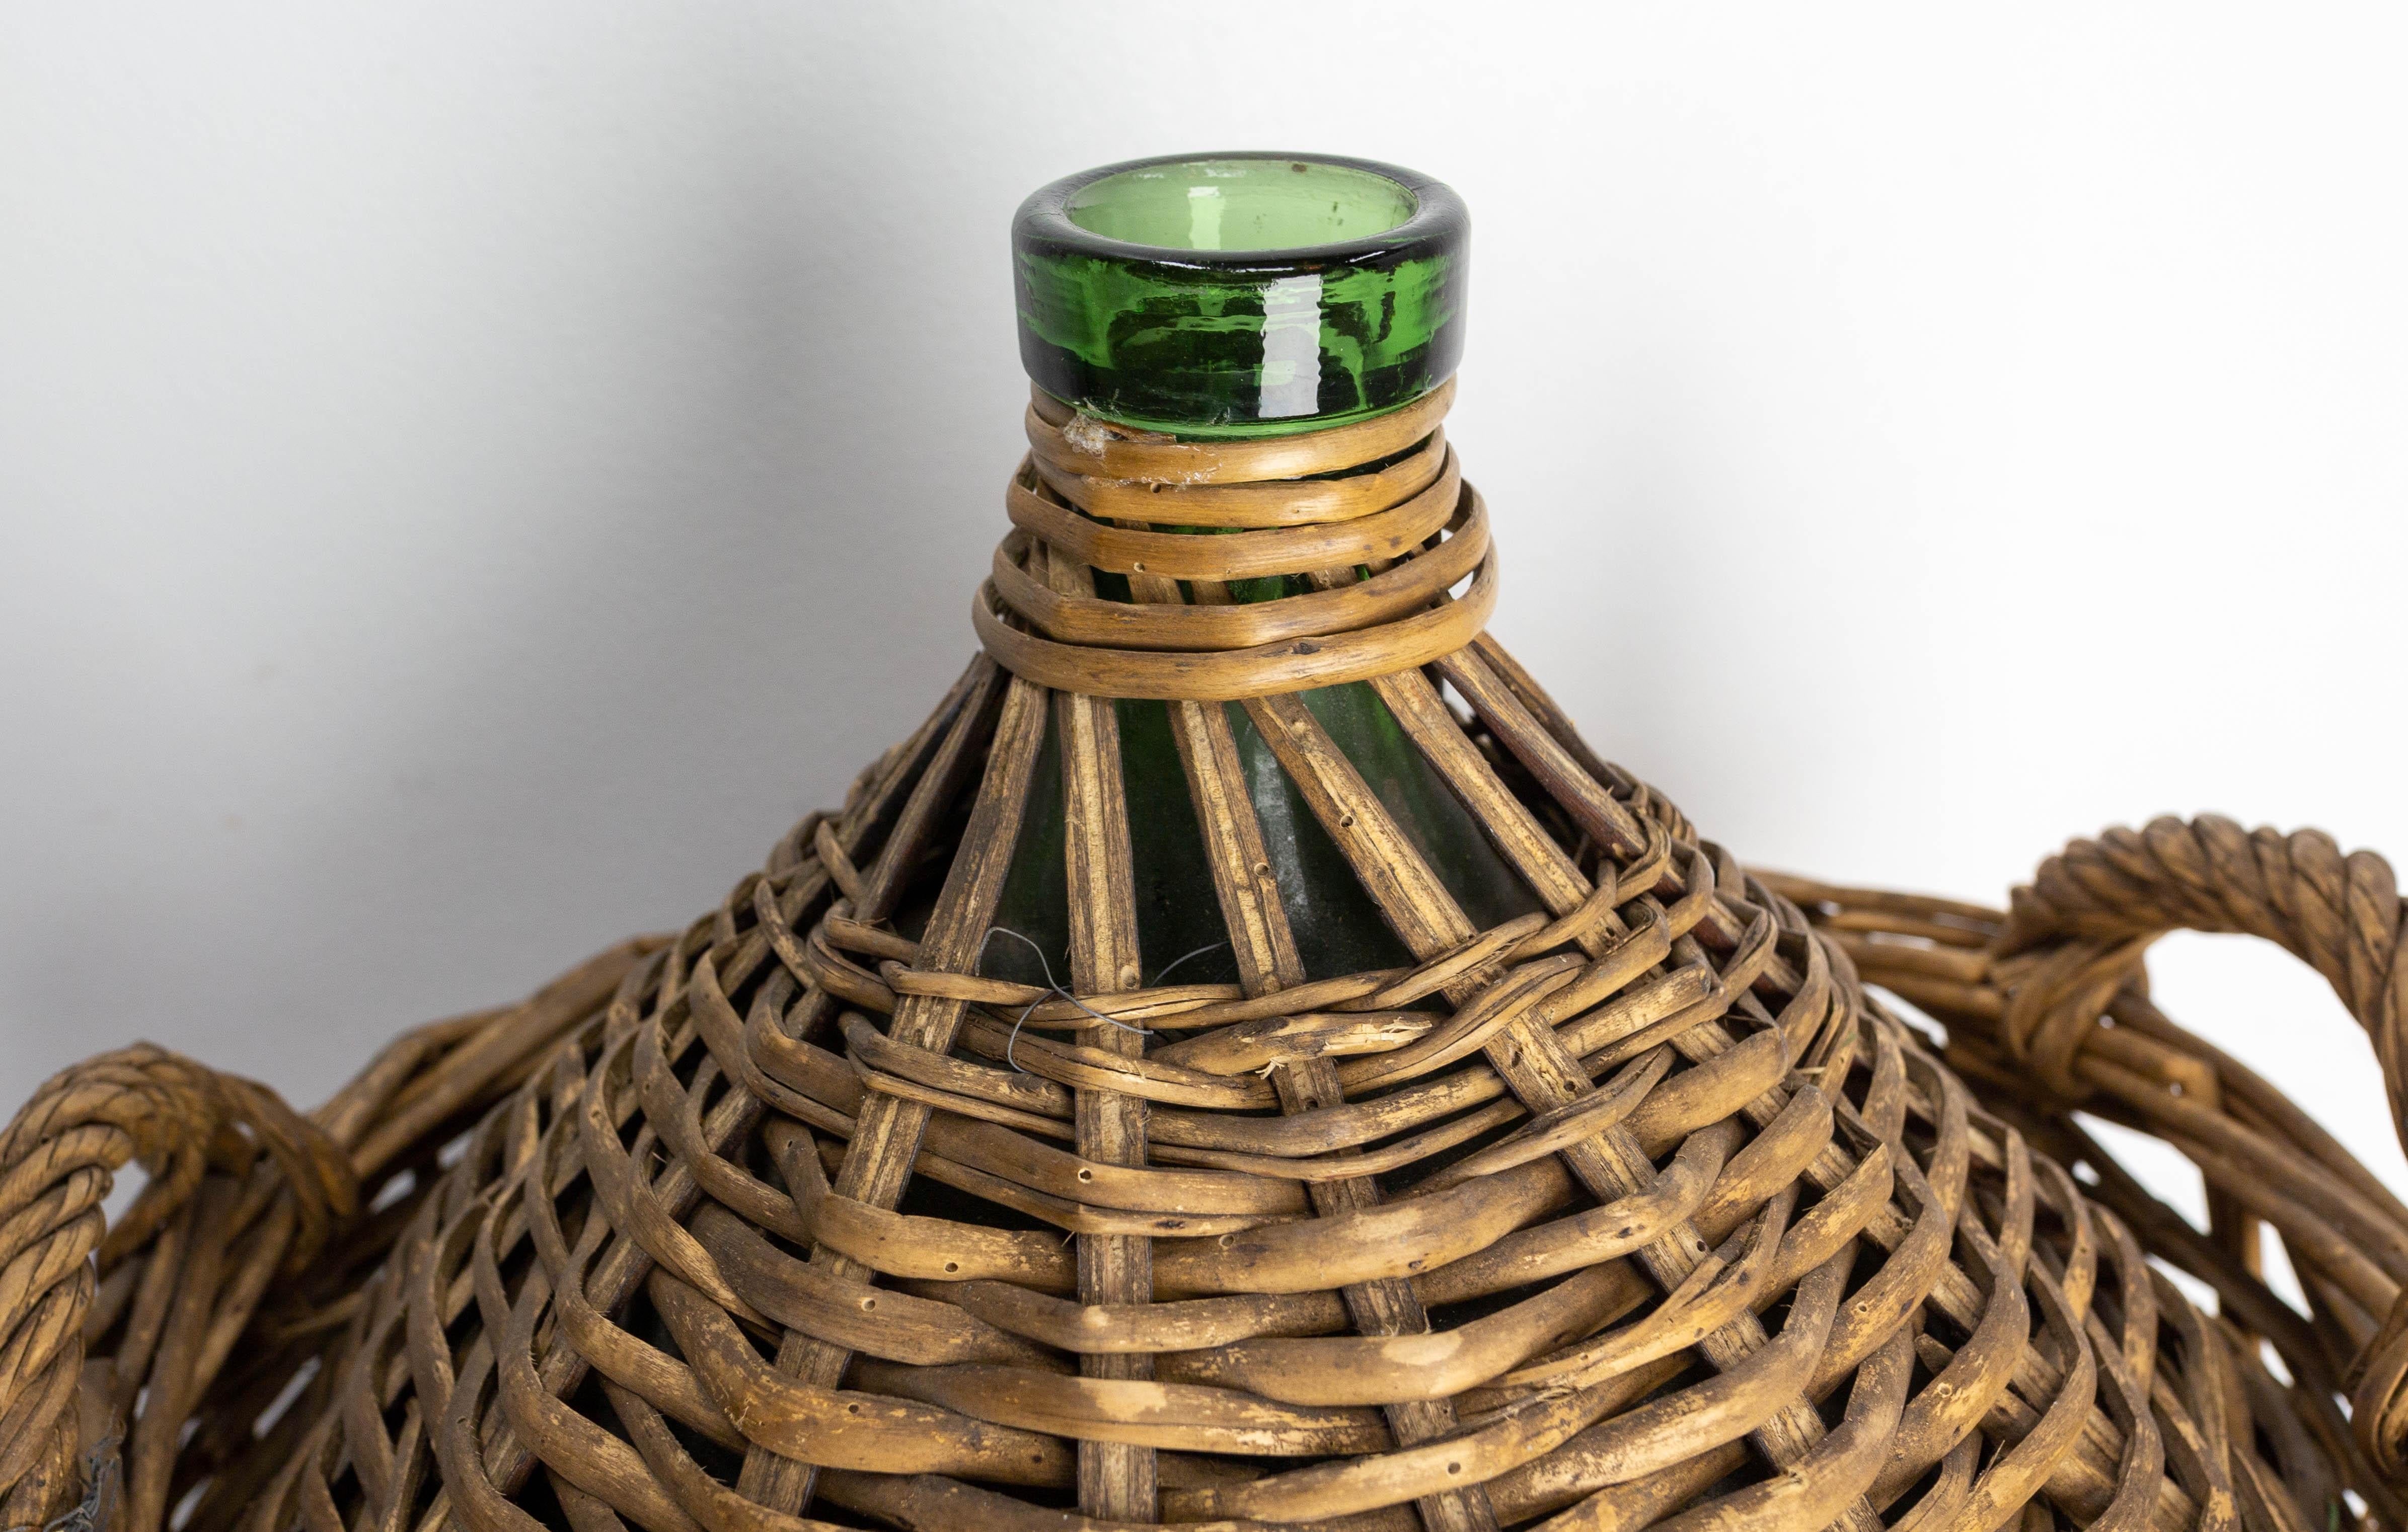 Antique Greenglass Bottle Demijohns or Carboy in Authentic Wicker Basket, France For Sale 3